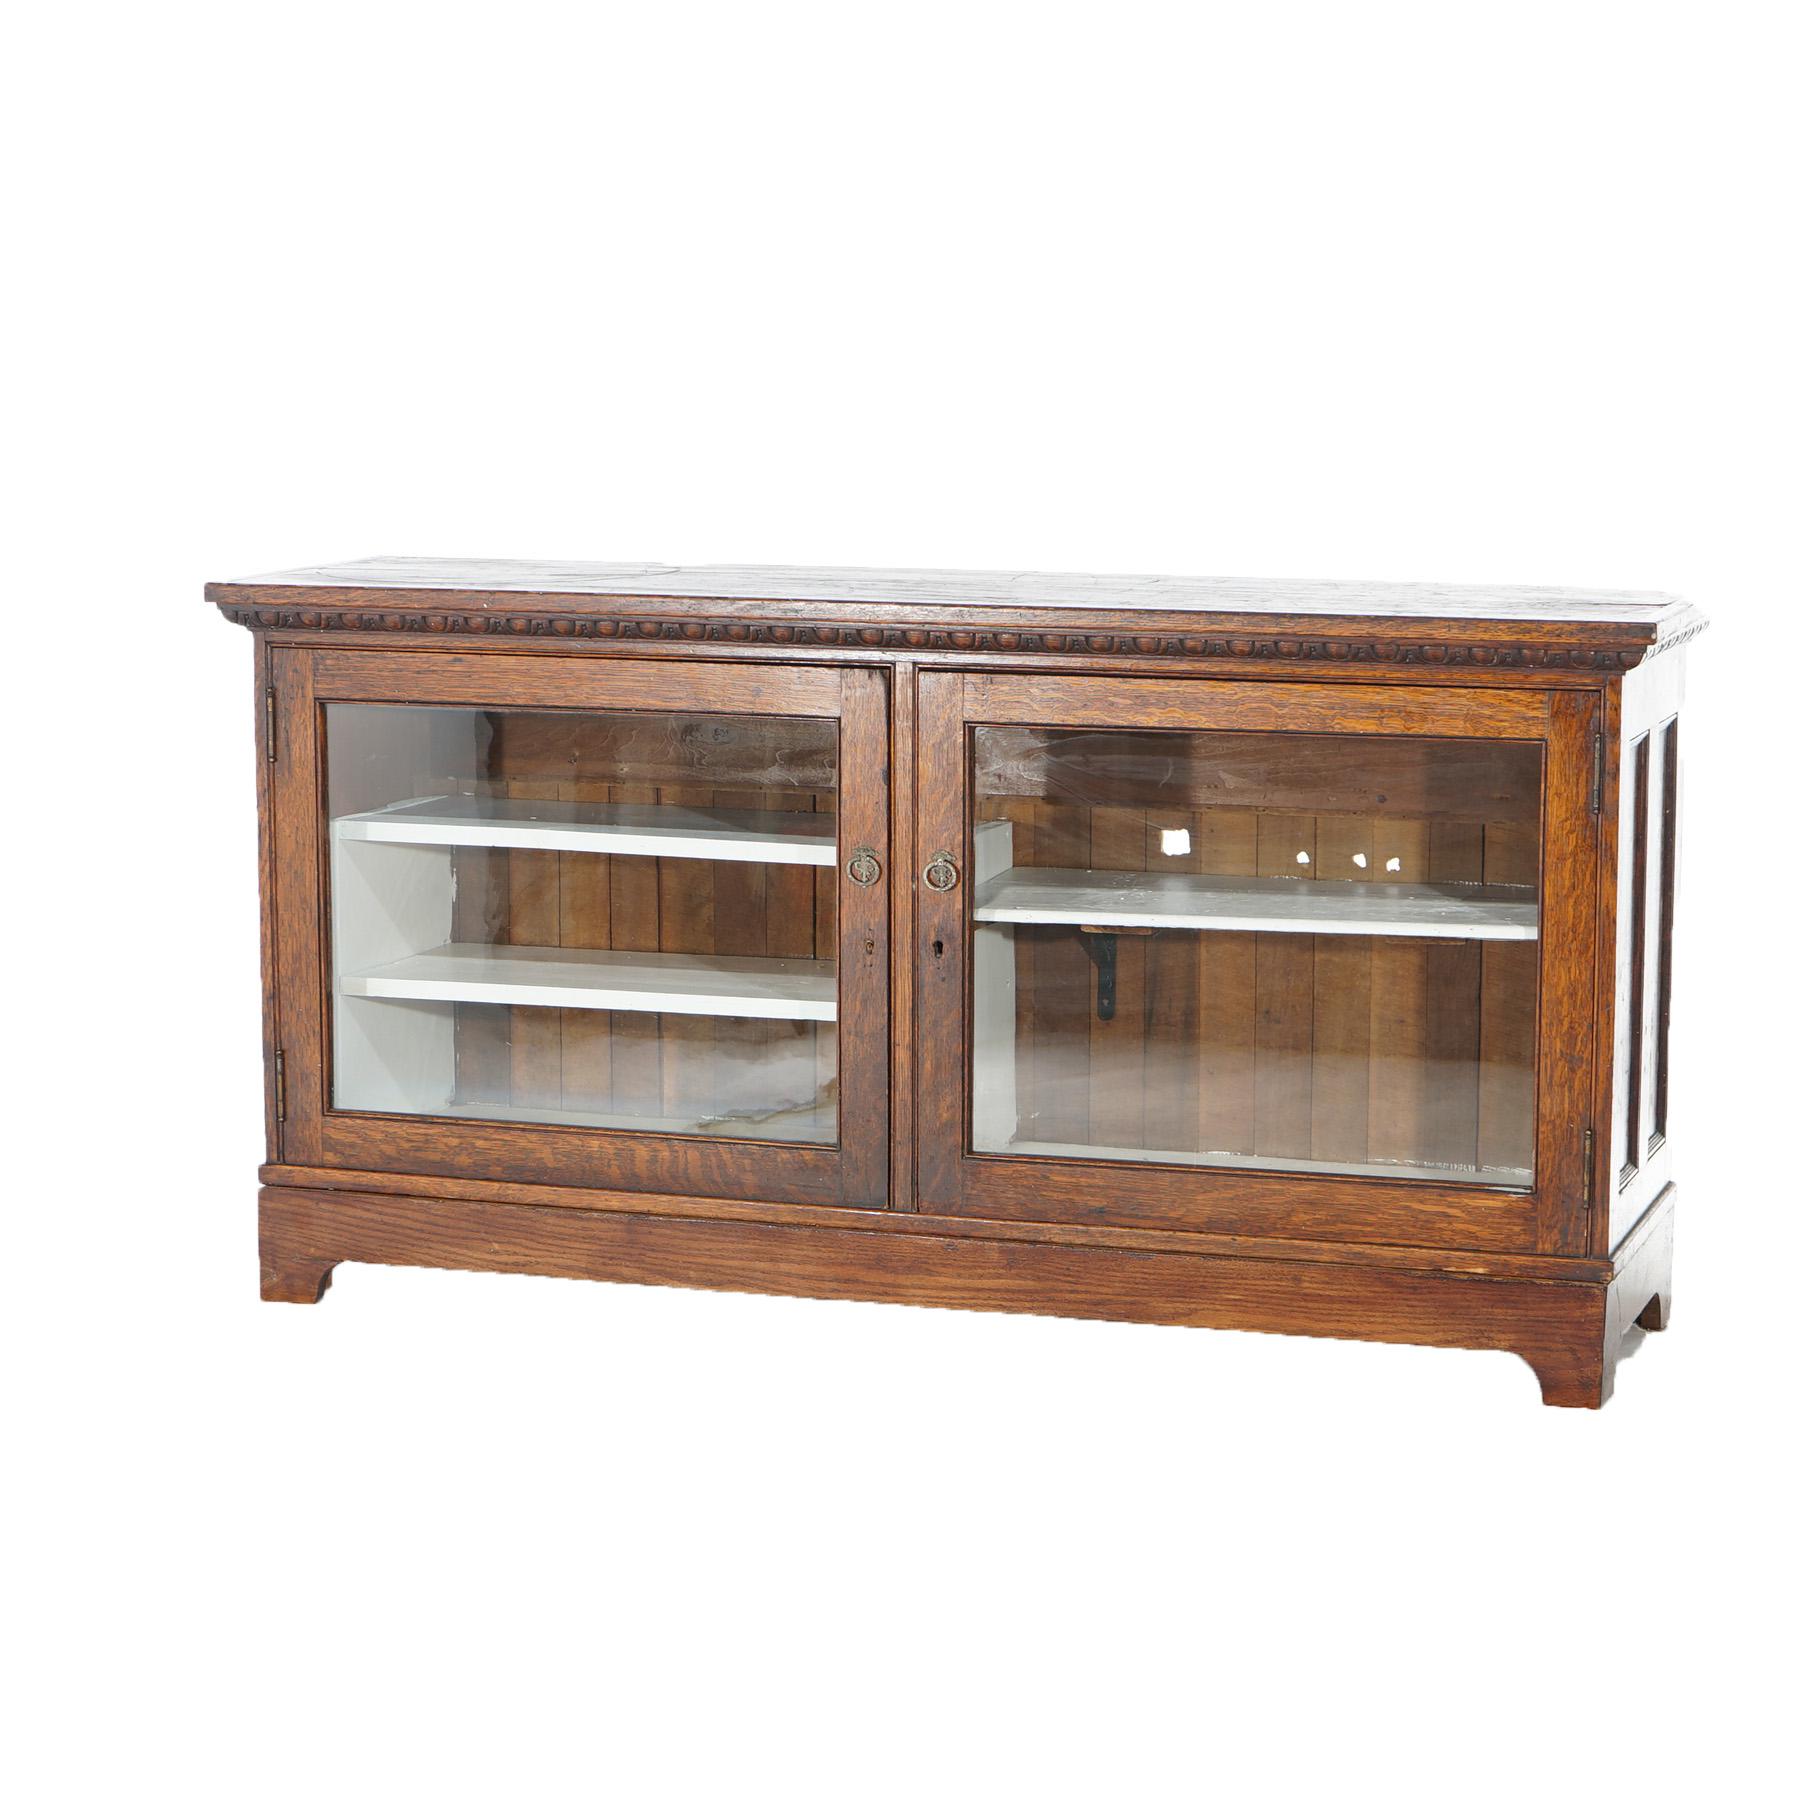 76407 - ATW An antique country store display showcase offers quarter sawn oak construction with paneled sides, carved molding, double glass doors opening to shelved interior and raised on bracket feet, c1900

Measures - 31